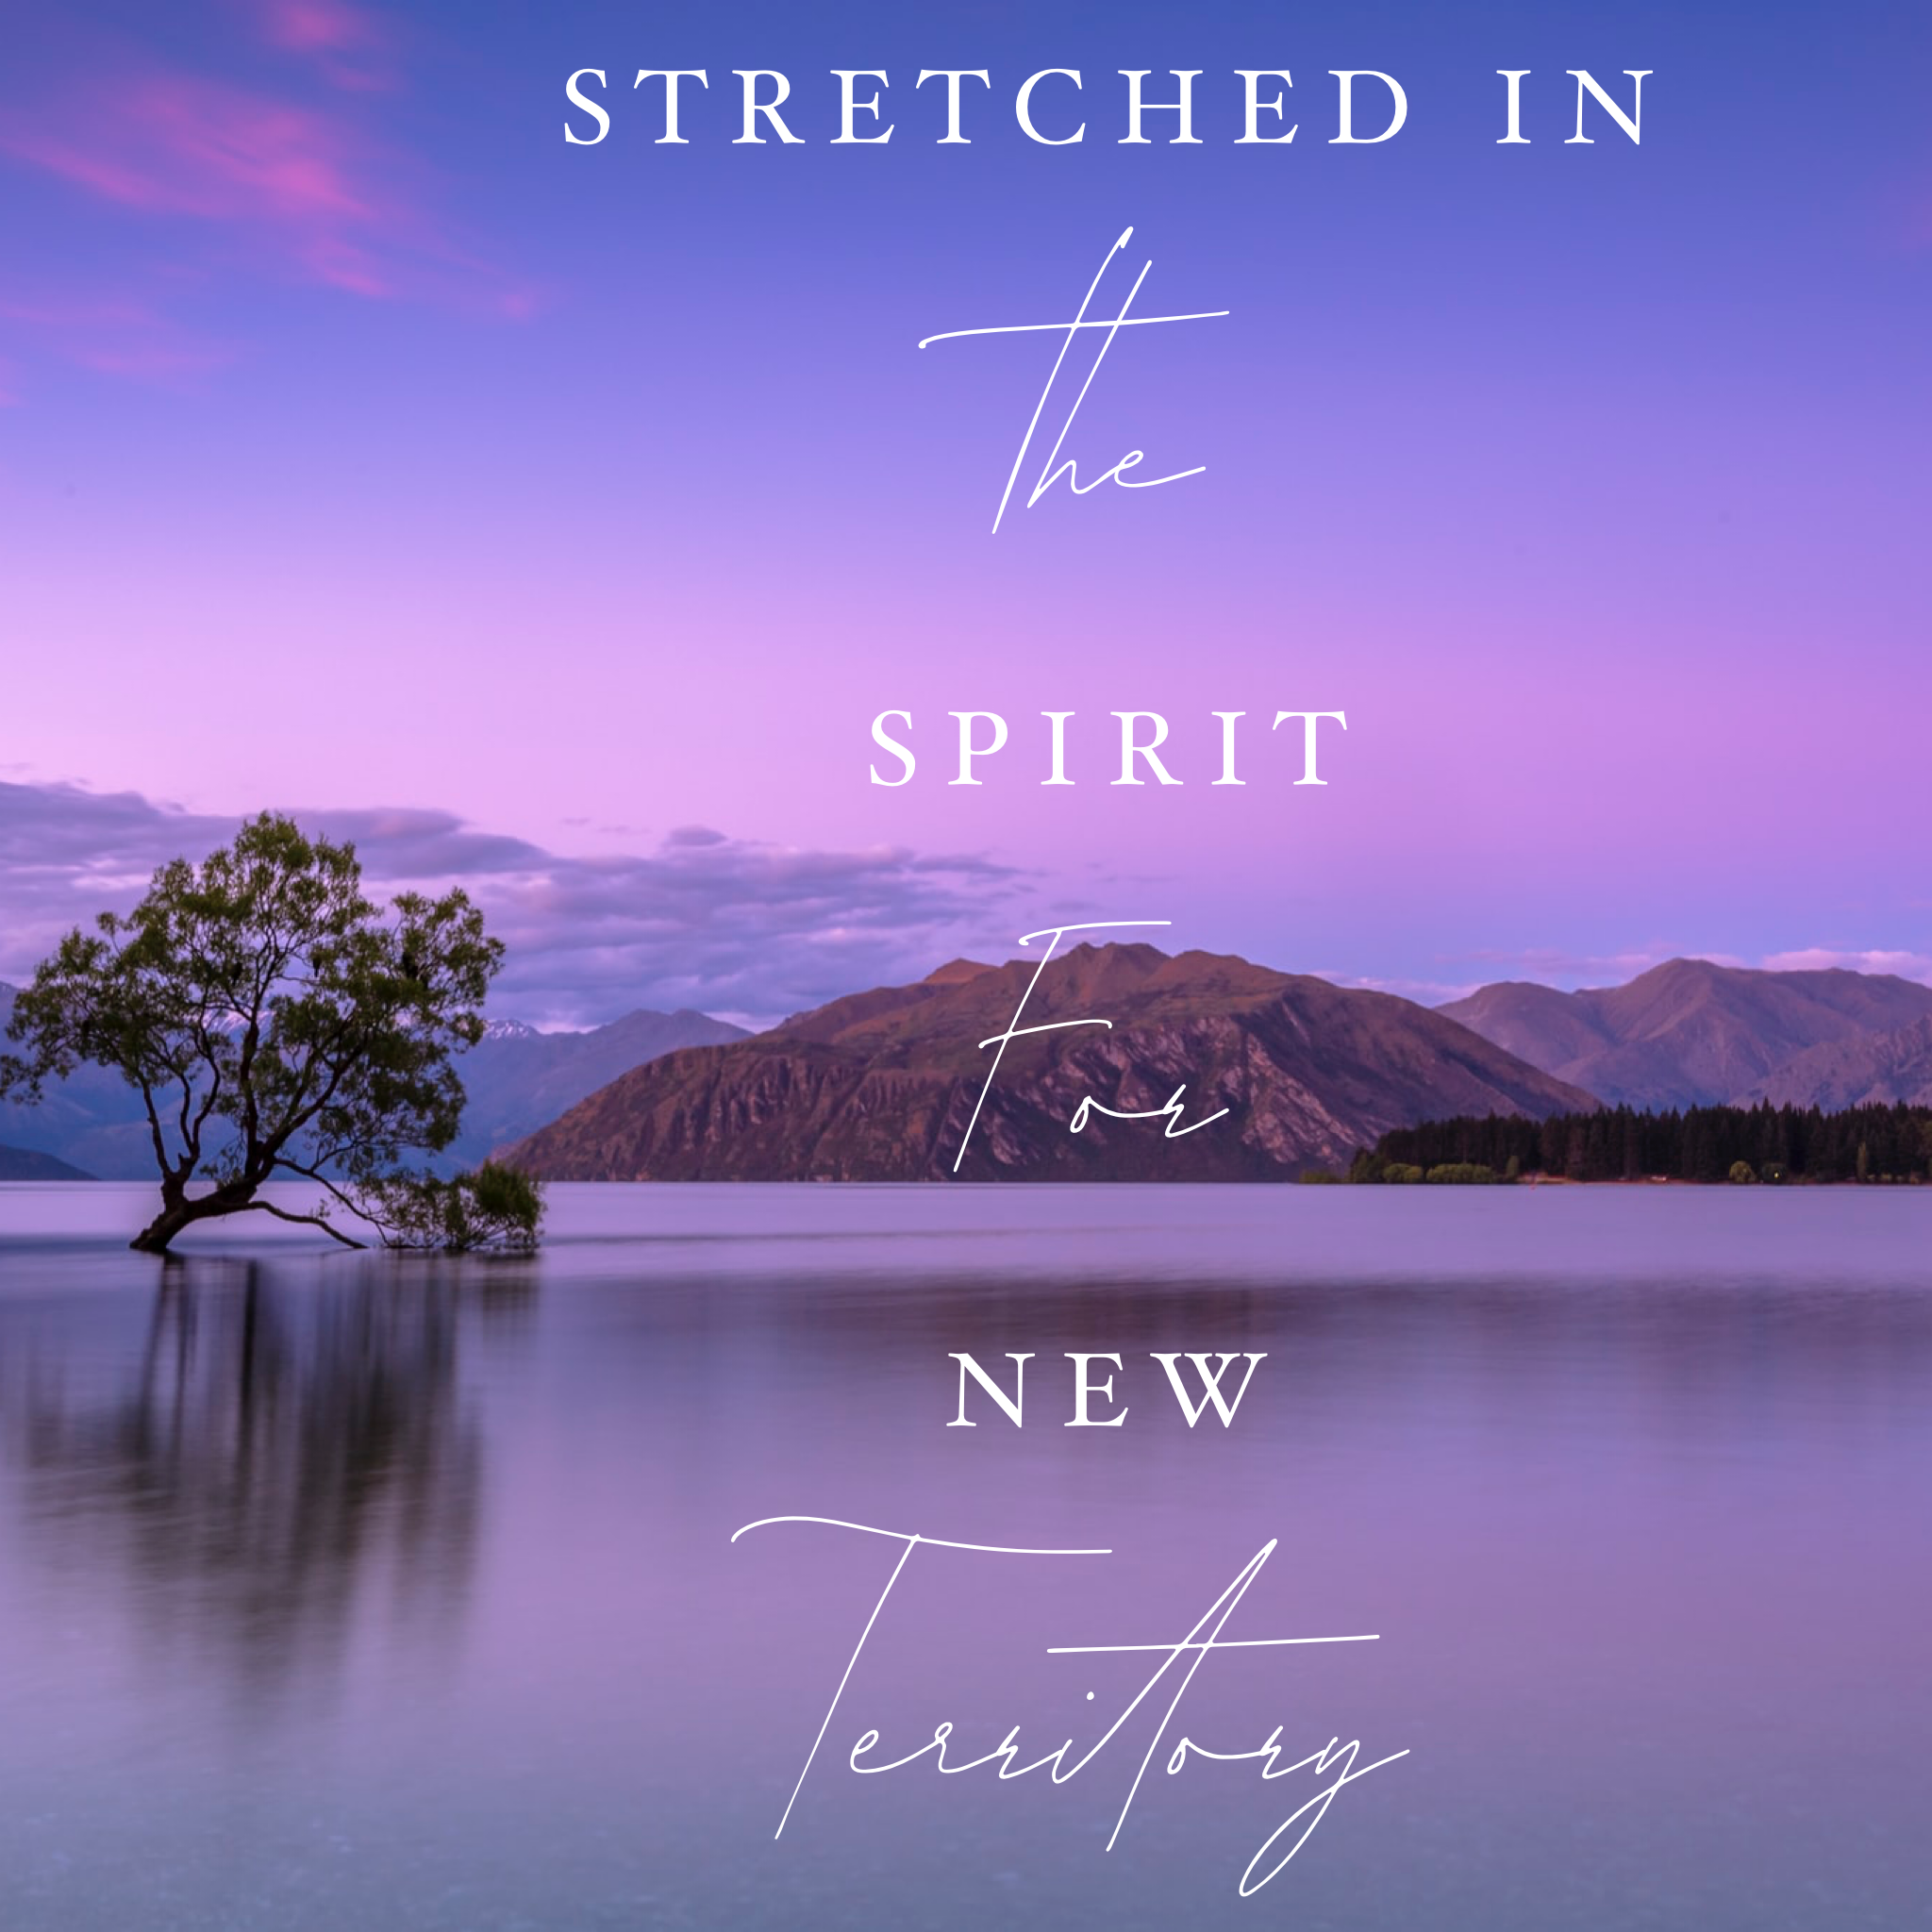 Stretched in the Spirit for New Territory - 7/5/19